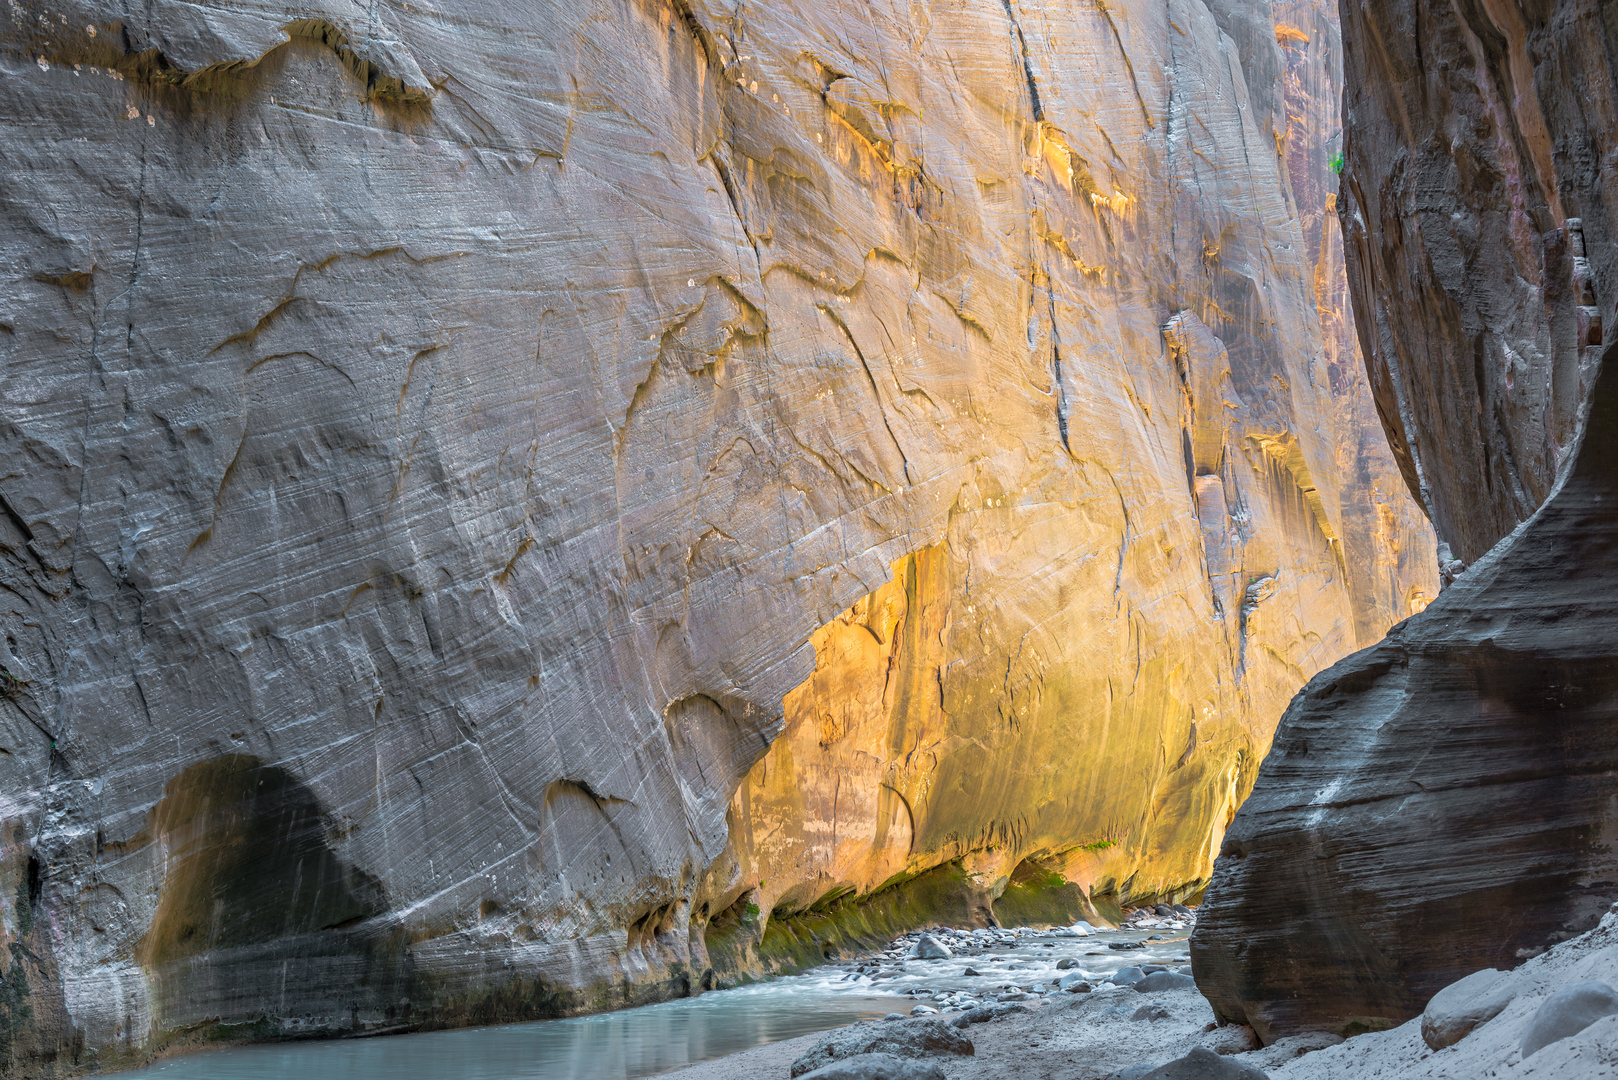 The Narrows (2), Zion National Park